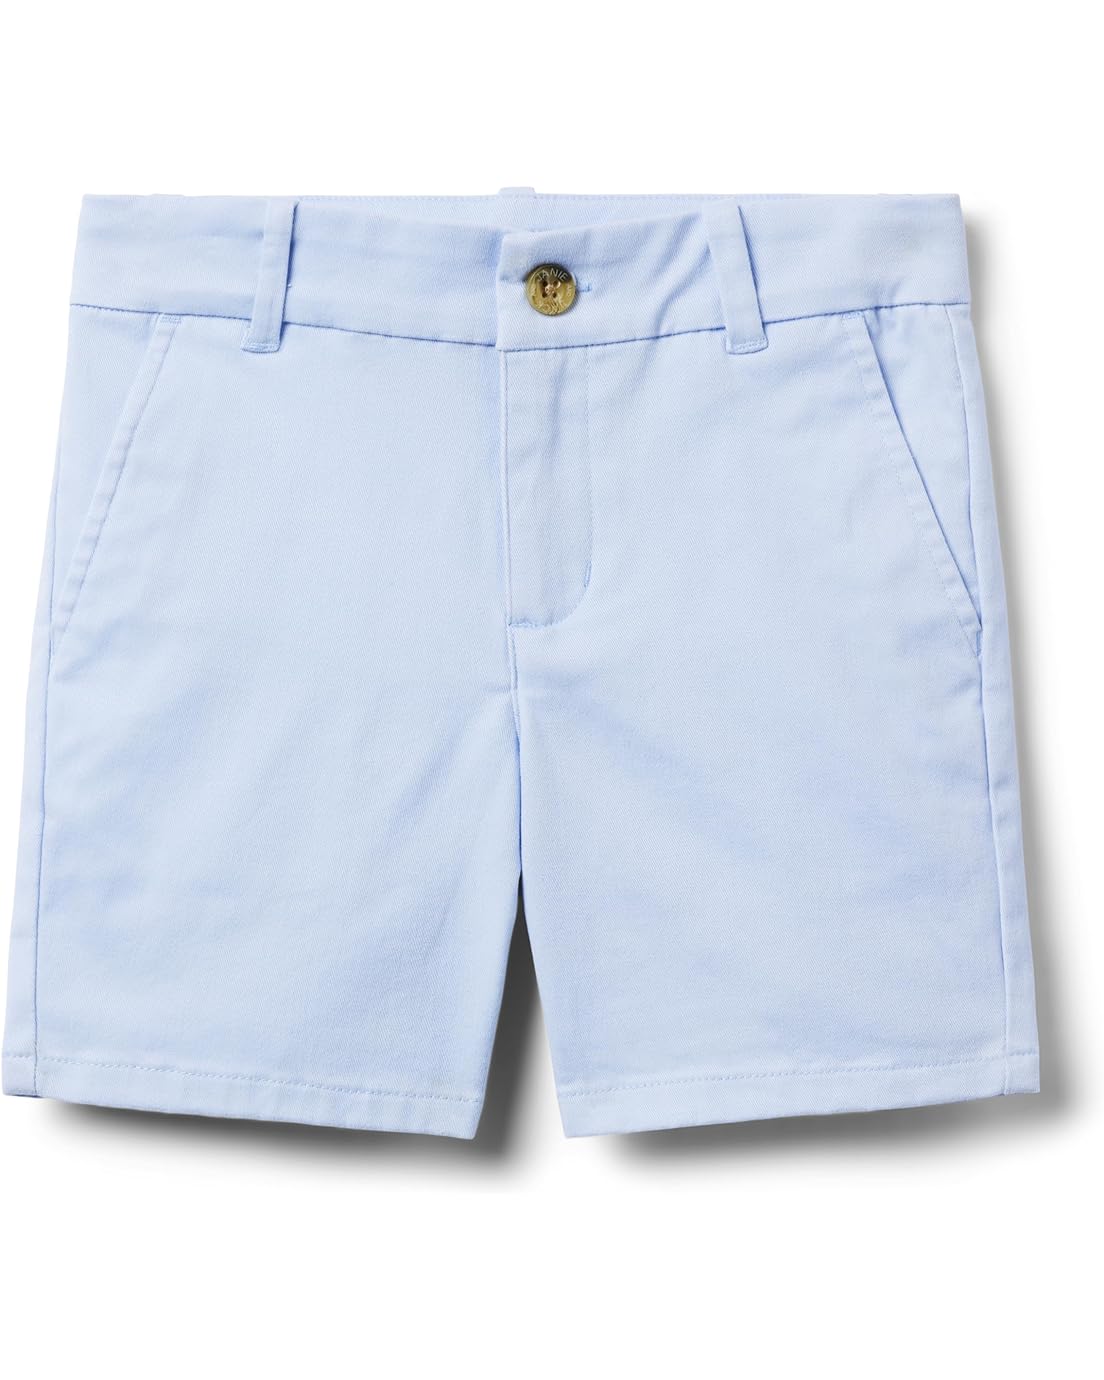 Janie and Jack Twill Flat Front Short (Toddler/Little Kids/Big Kids)